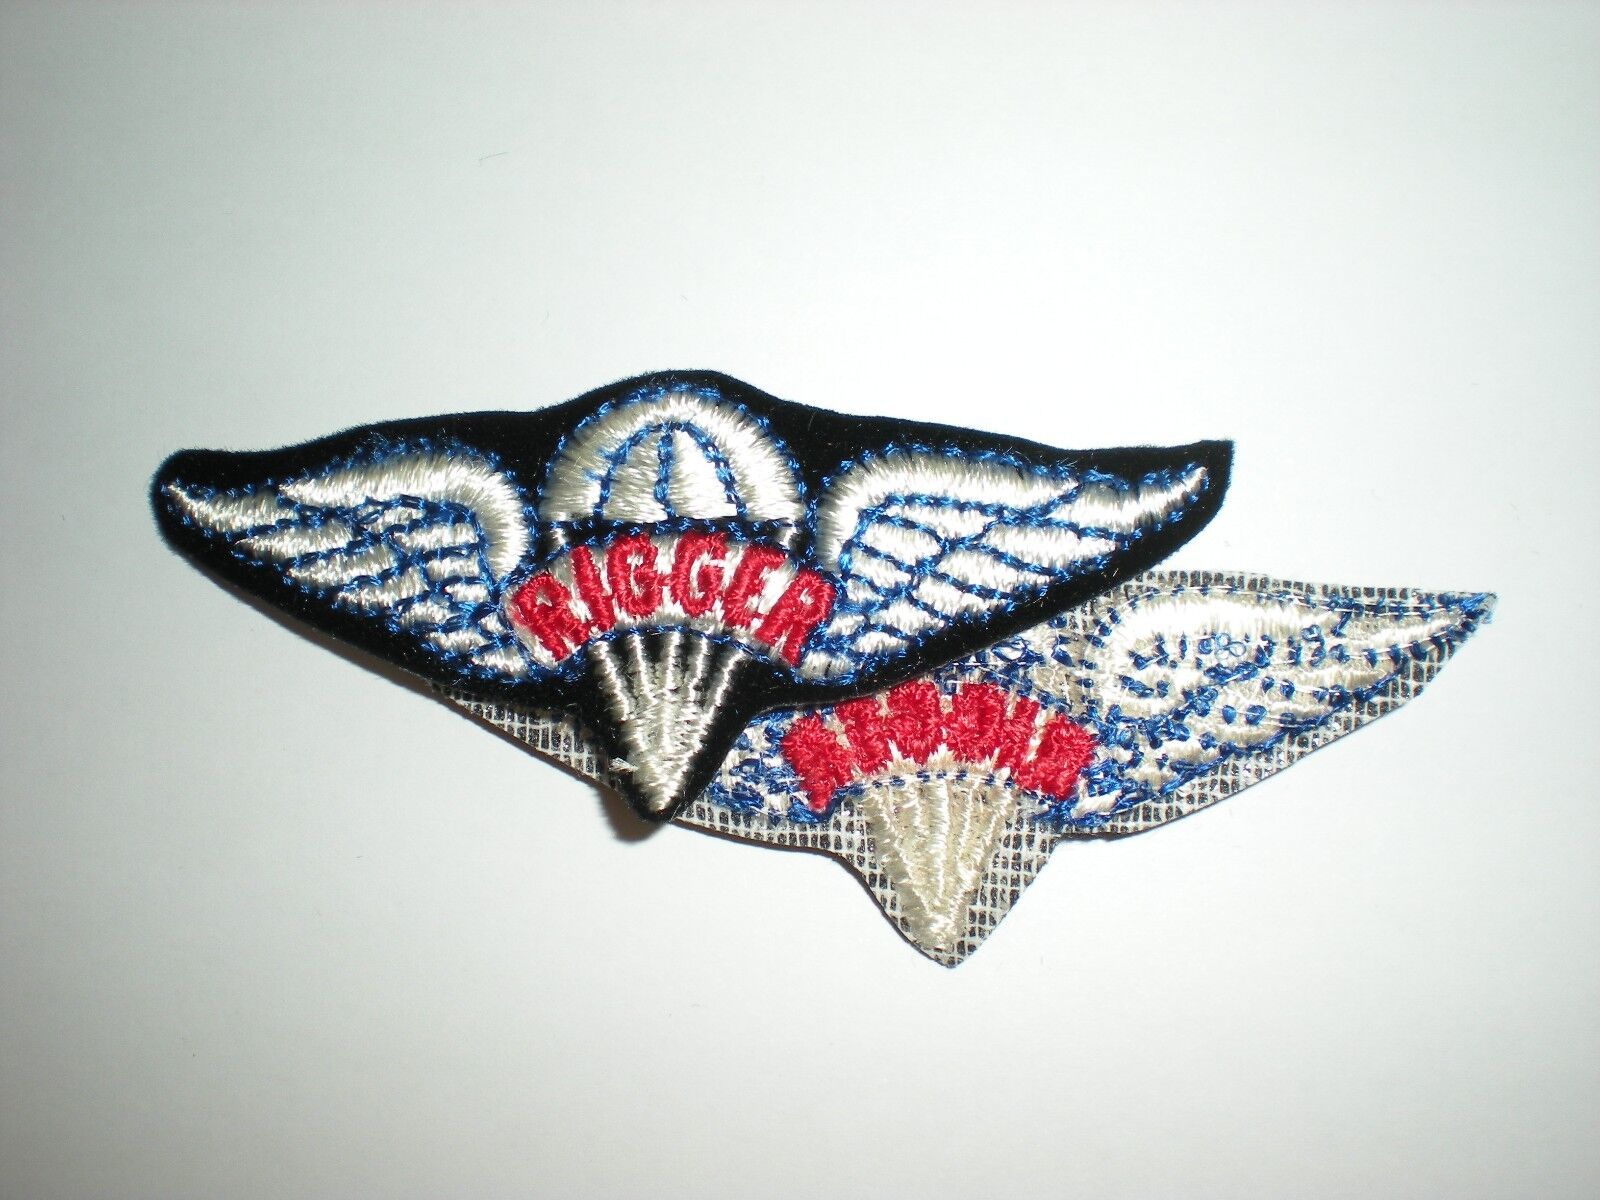 US ARMY PARACHUTE RIGGER WINGS PATCH - COLOR